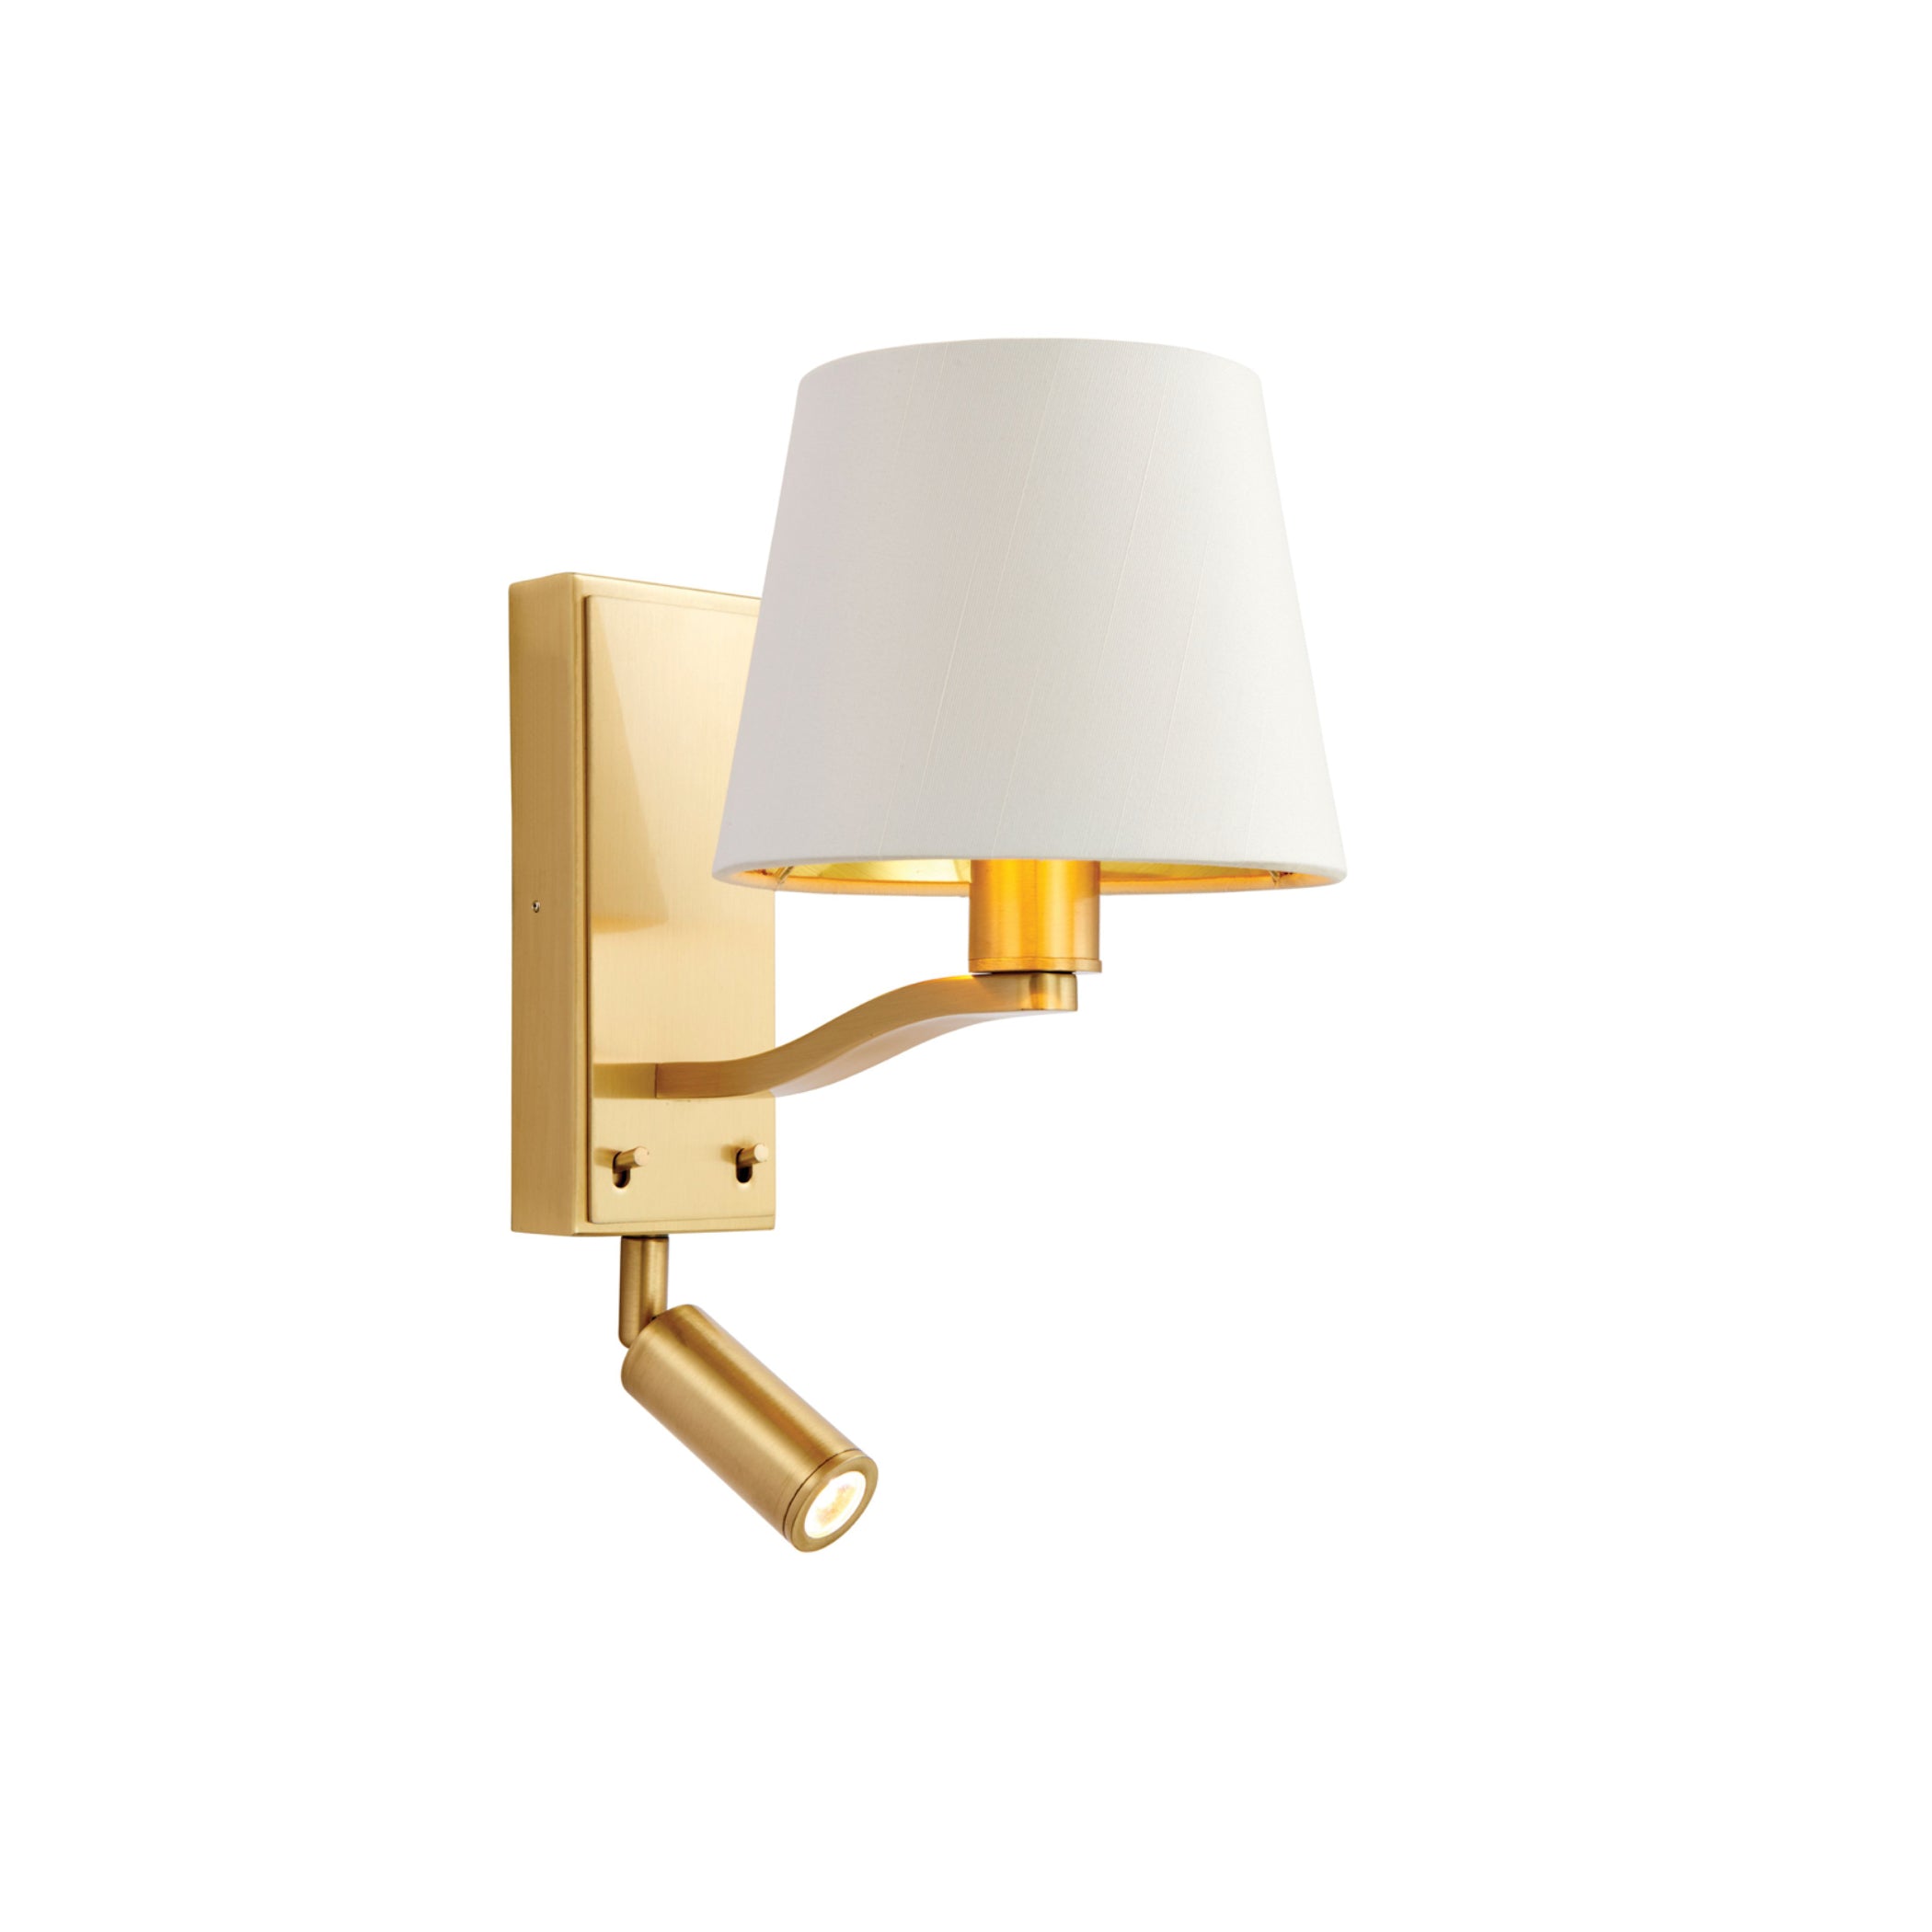 Brushed Satin Gold Wall Light with Shade & adjustable LED reading light 1